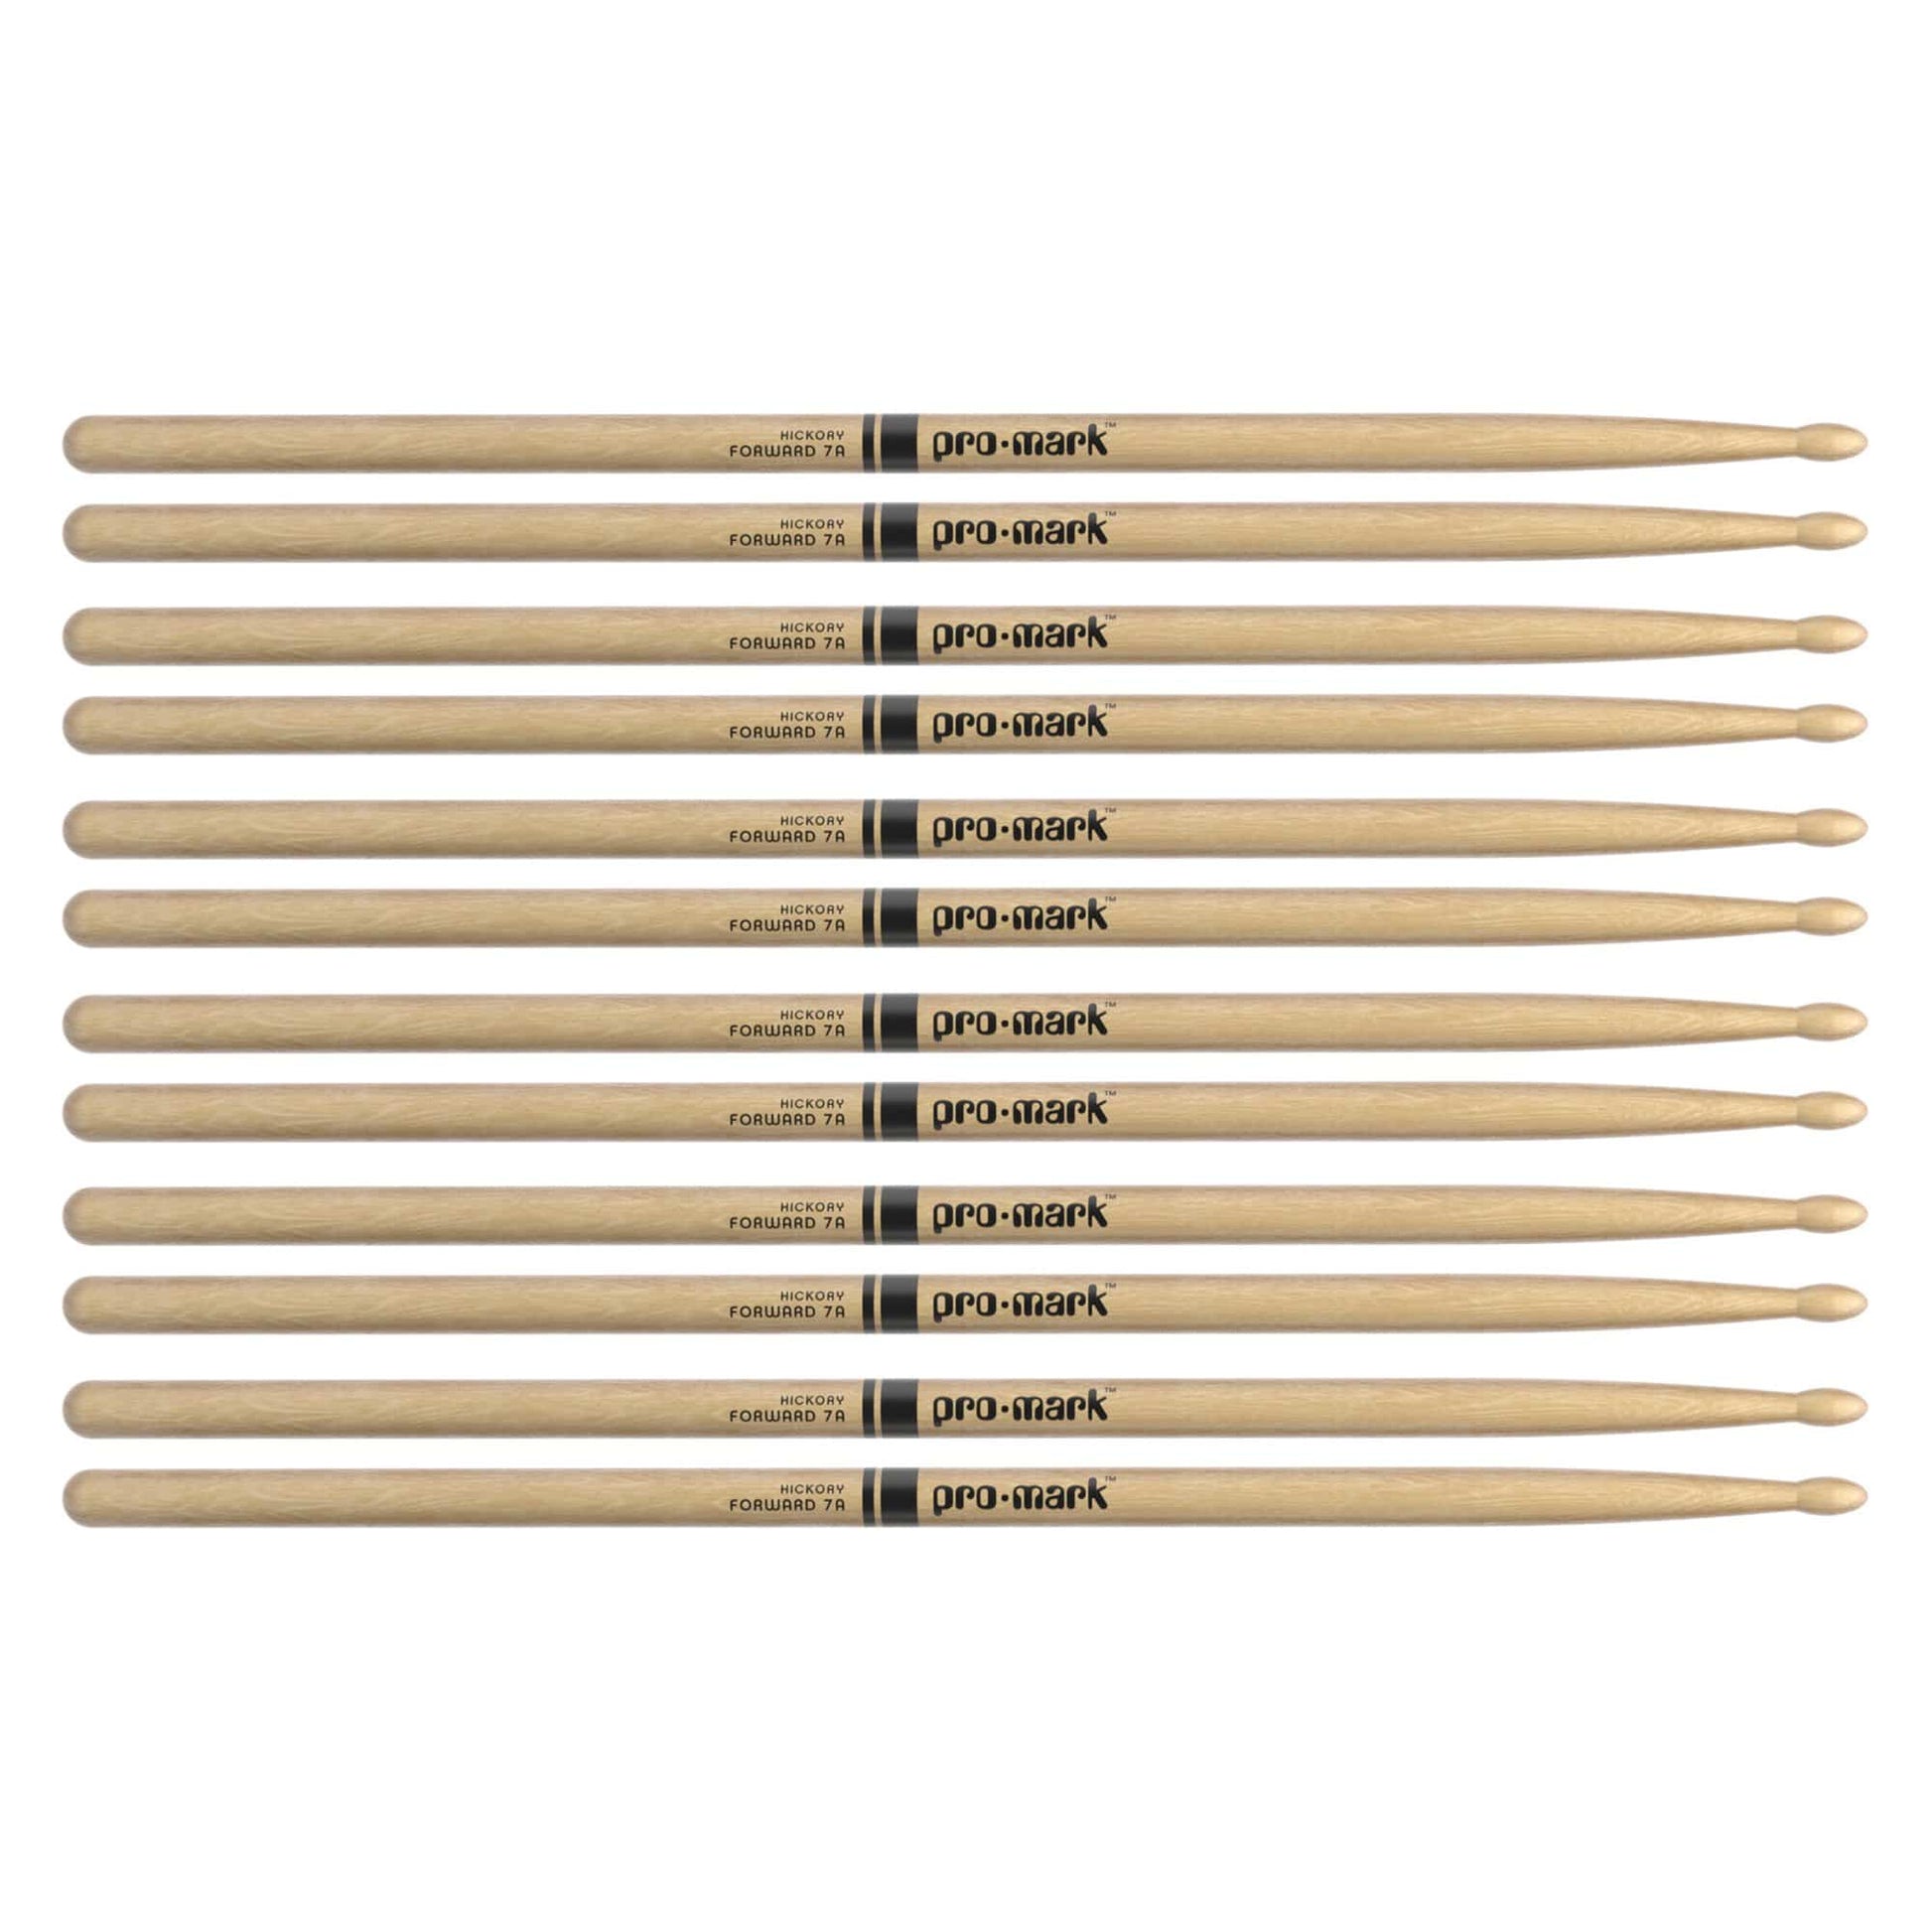 Promark American Hickory 7A Wood Tip Drum Sticks (6 Pair Bundle) Drums and Percussion / Parts and Accessories / Drum Sticks and Mallets